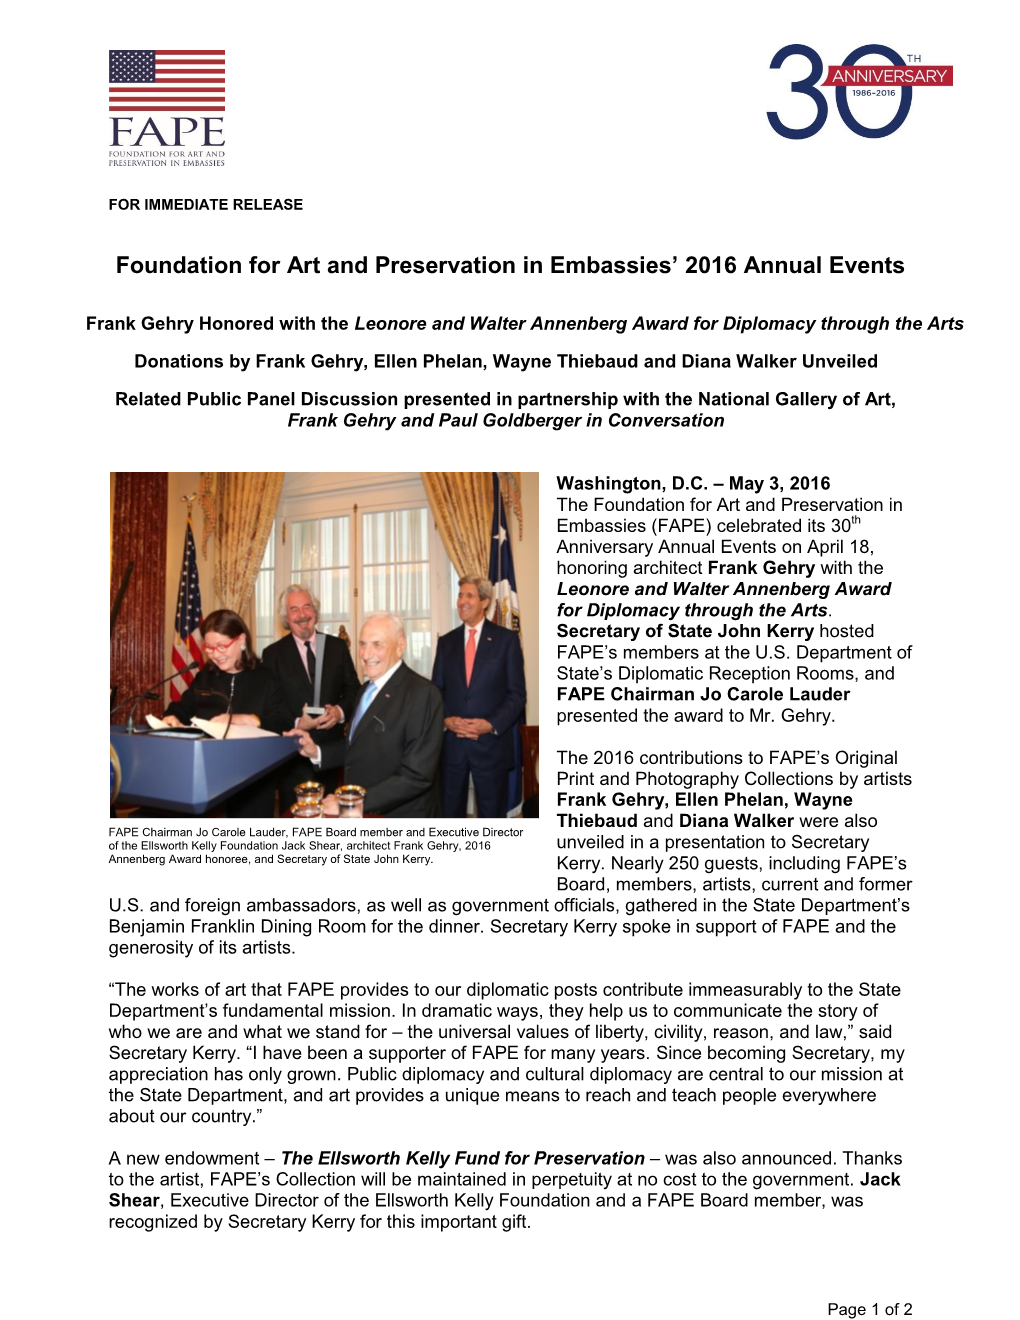 Foundation for Art and Preservation in Embassies' 2016 Annual Events